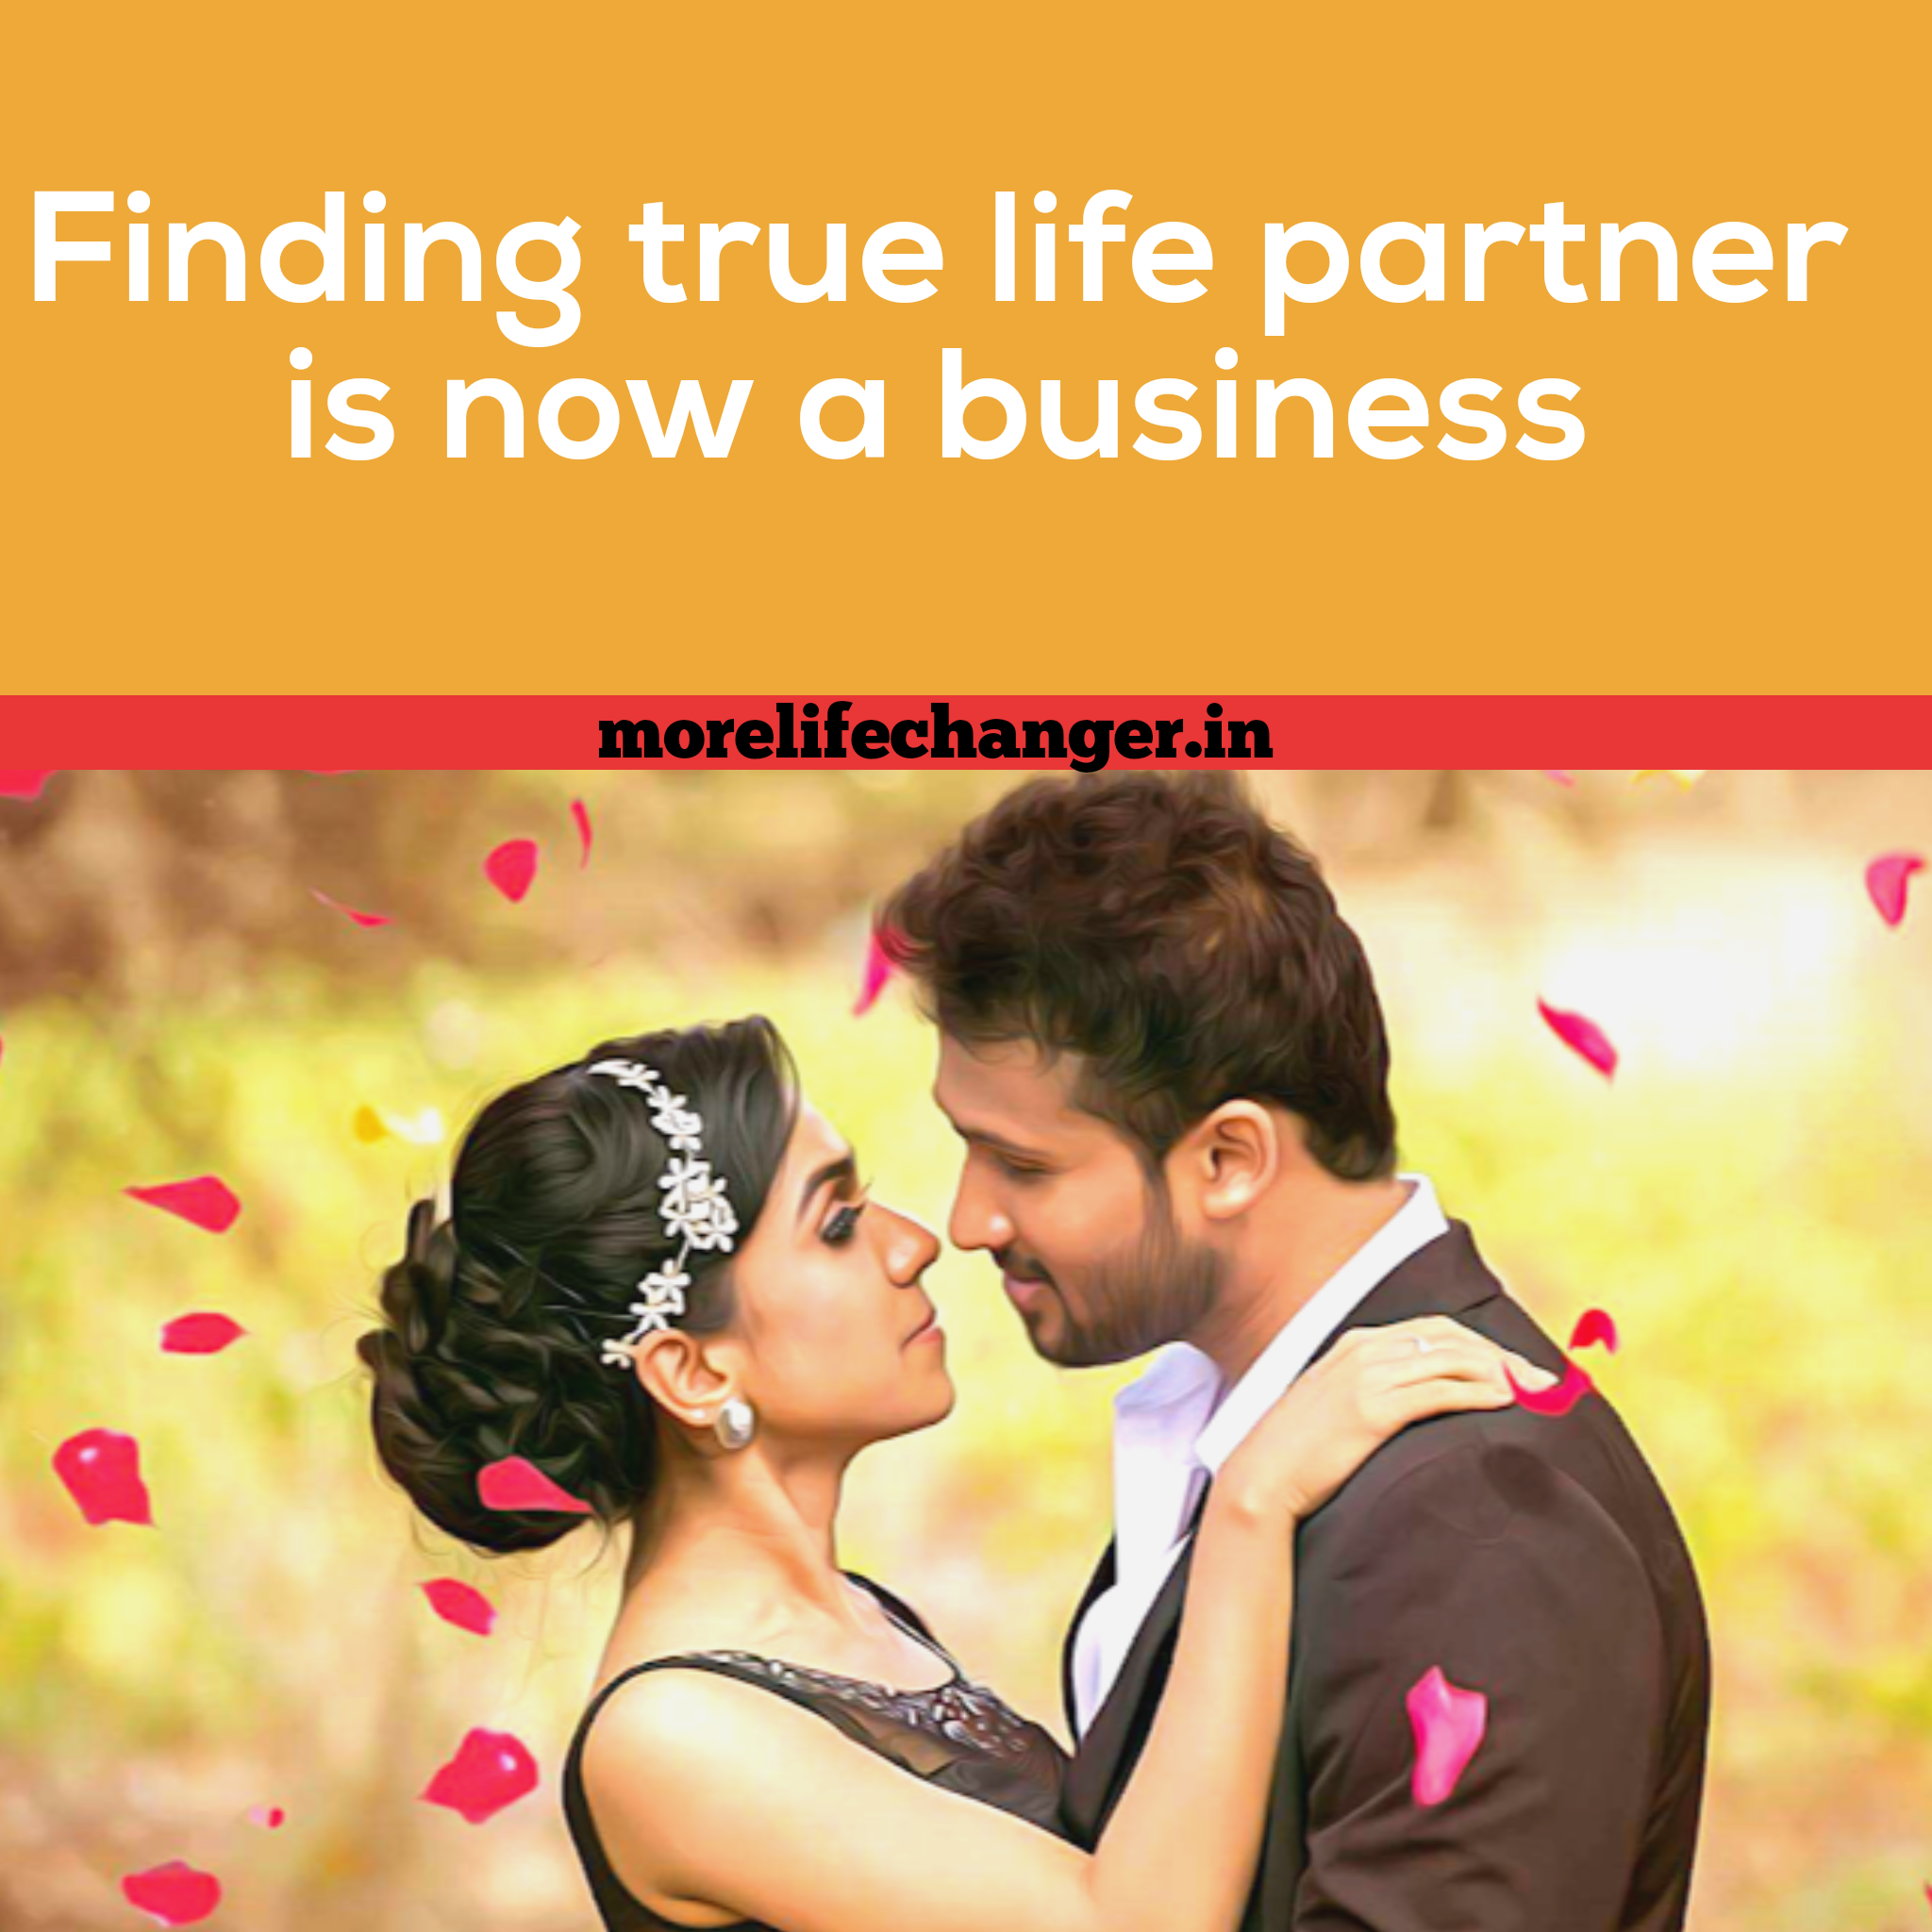 Finding true life partner is now business